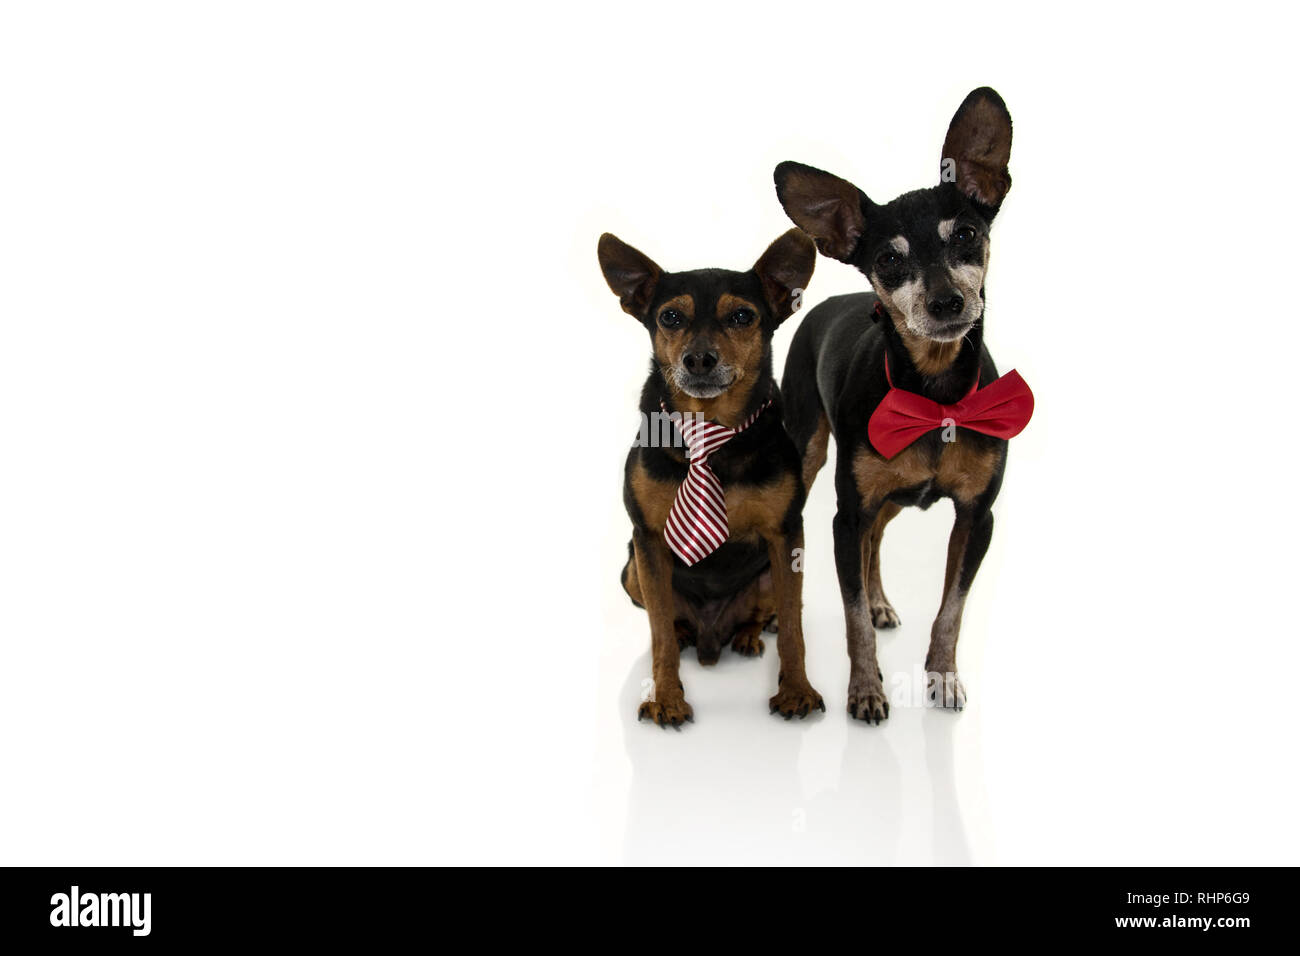 TWO PINSCHERS DOGS WITH RED BOW TIE ISOLATED ON WHITE BACKGROUND. Stock Photo